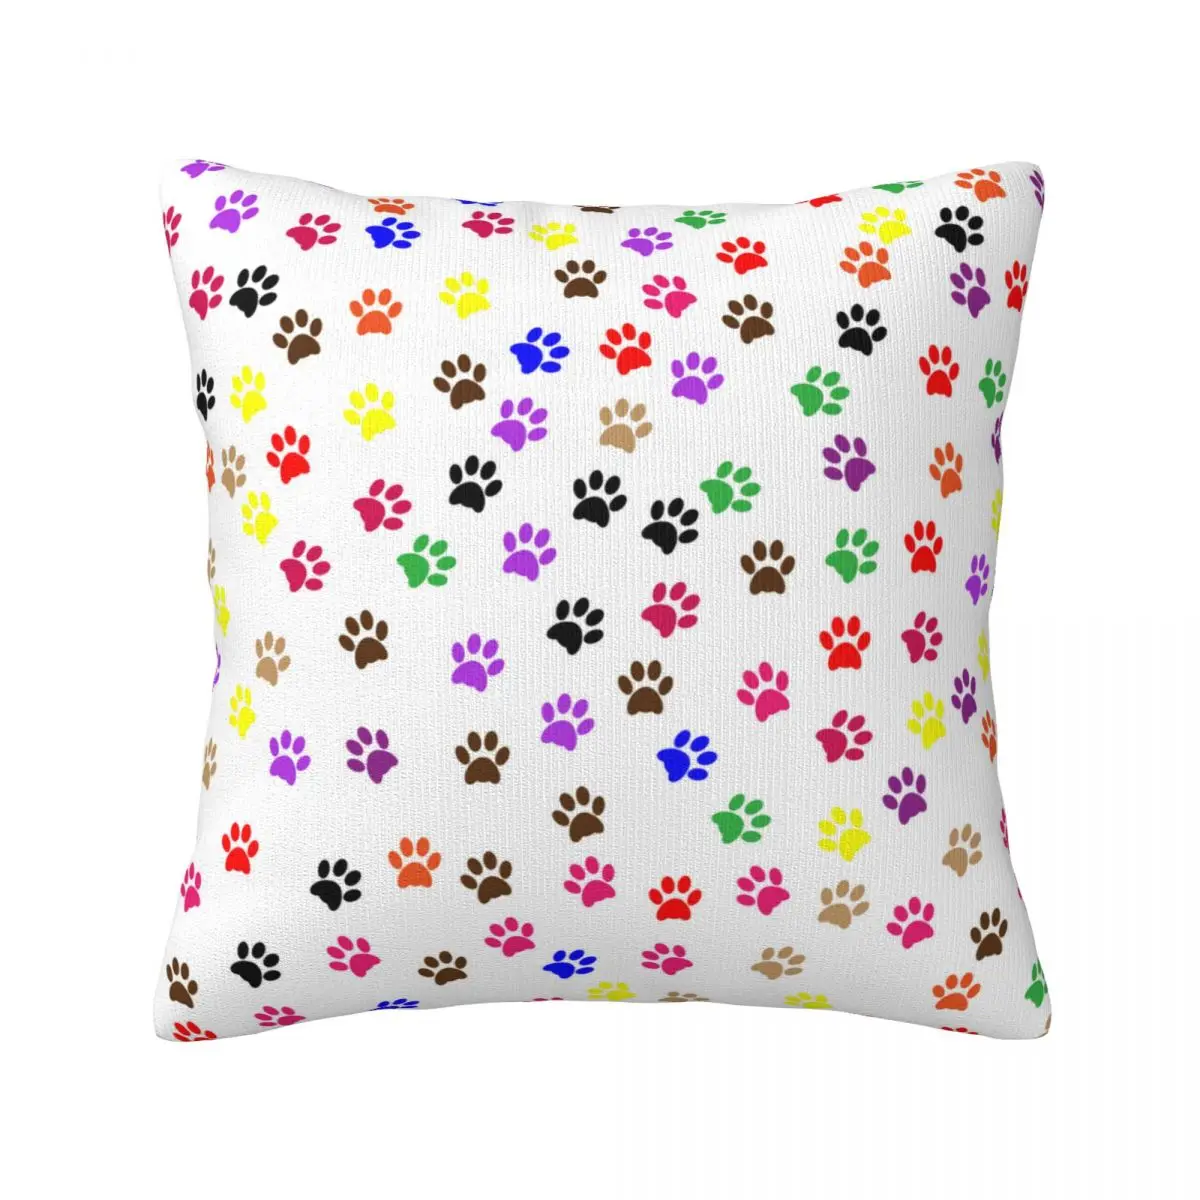 

Colorful Dog Paw Print Throw Pillow Cover Decorative Pillow Covers Home Pillows Shells Cushion Cover Zippered Pillowcase